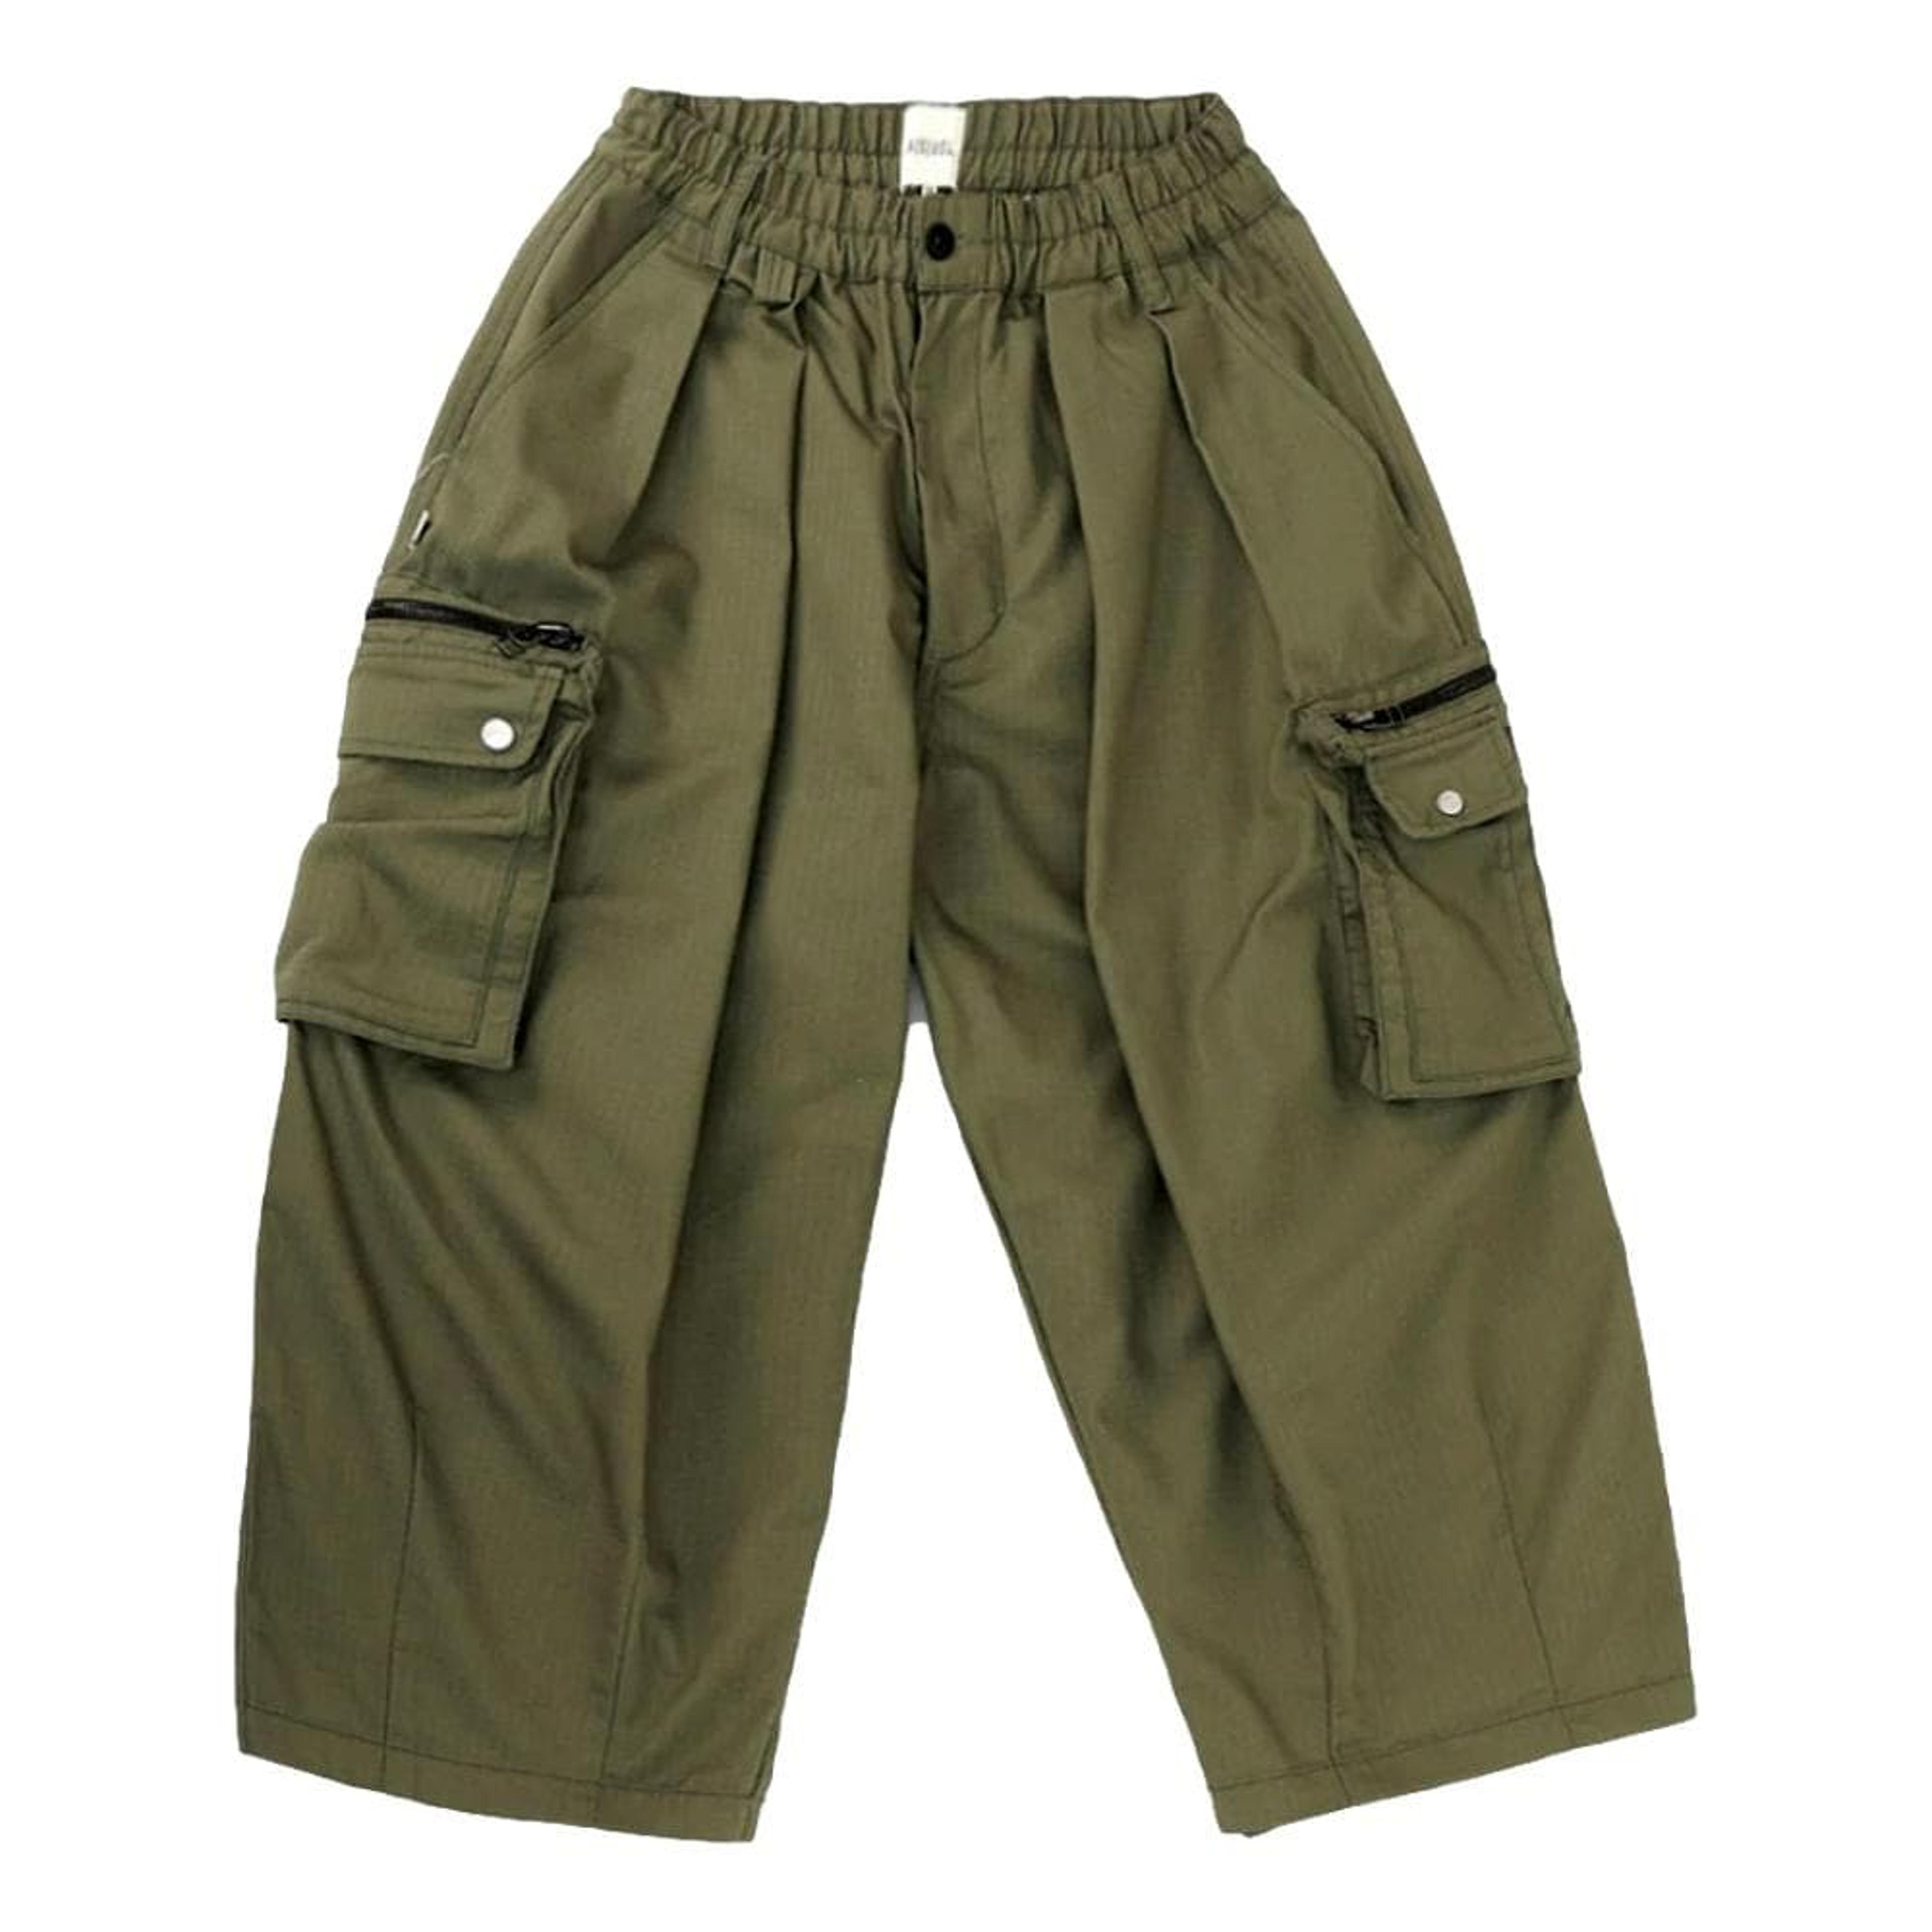 NTWRK - A[S]USL RIPSTOP MILITARY BALLOON PANTS-OLIVE